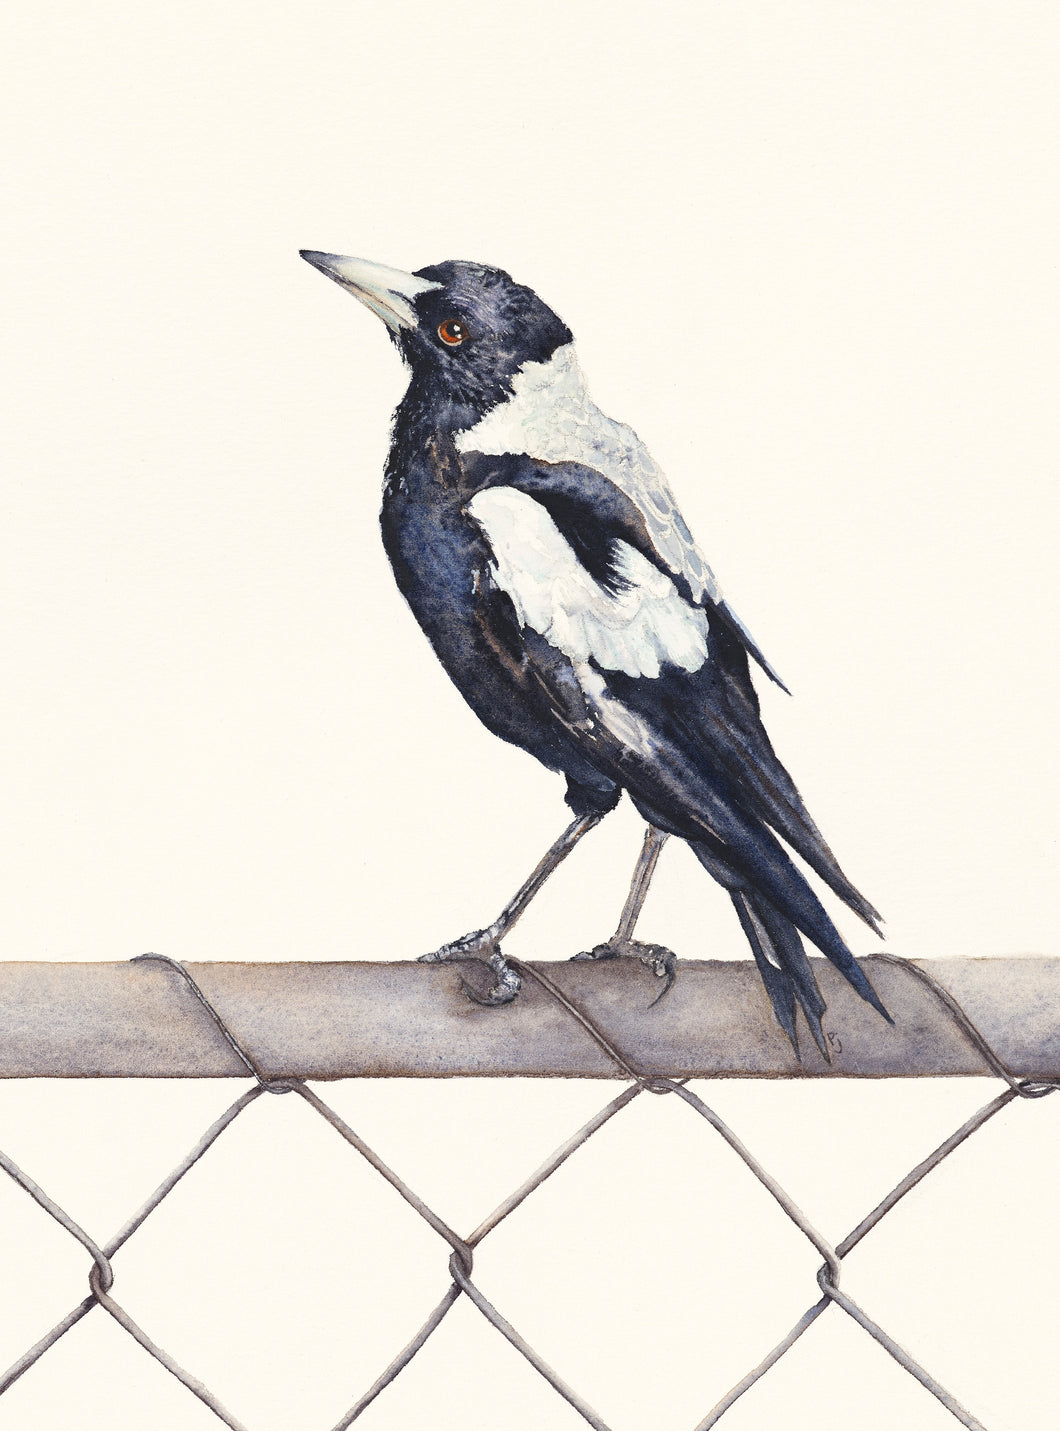 Maggie - A print of a watercolour painting of an Australian Magpie